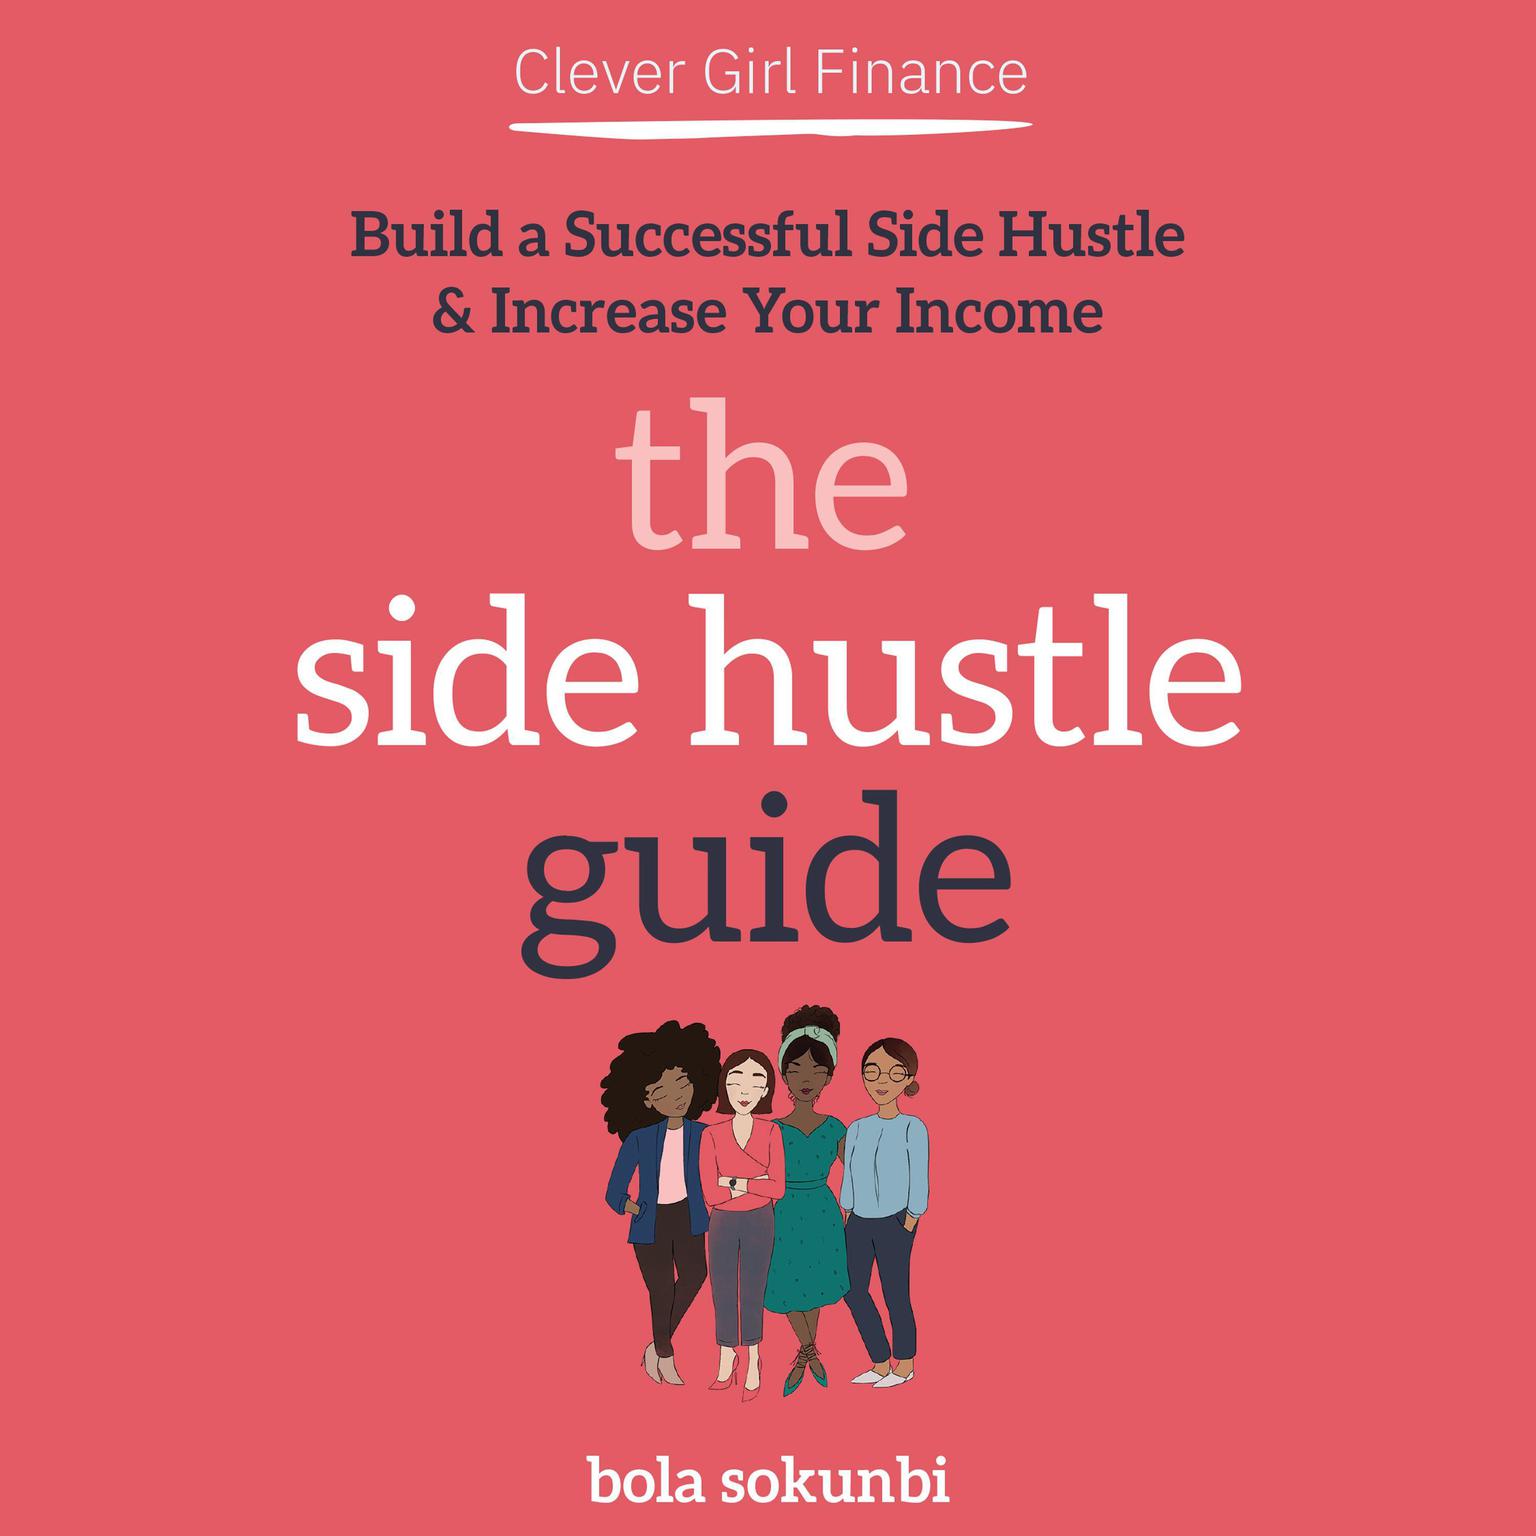 Clever Girl Finance: The Side Hustle Guide: Build a Successful Side Hustle and Increase Your Income  Audiobook, by Bola Sokunbi